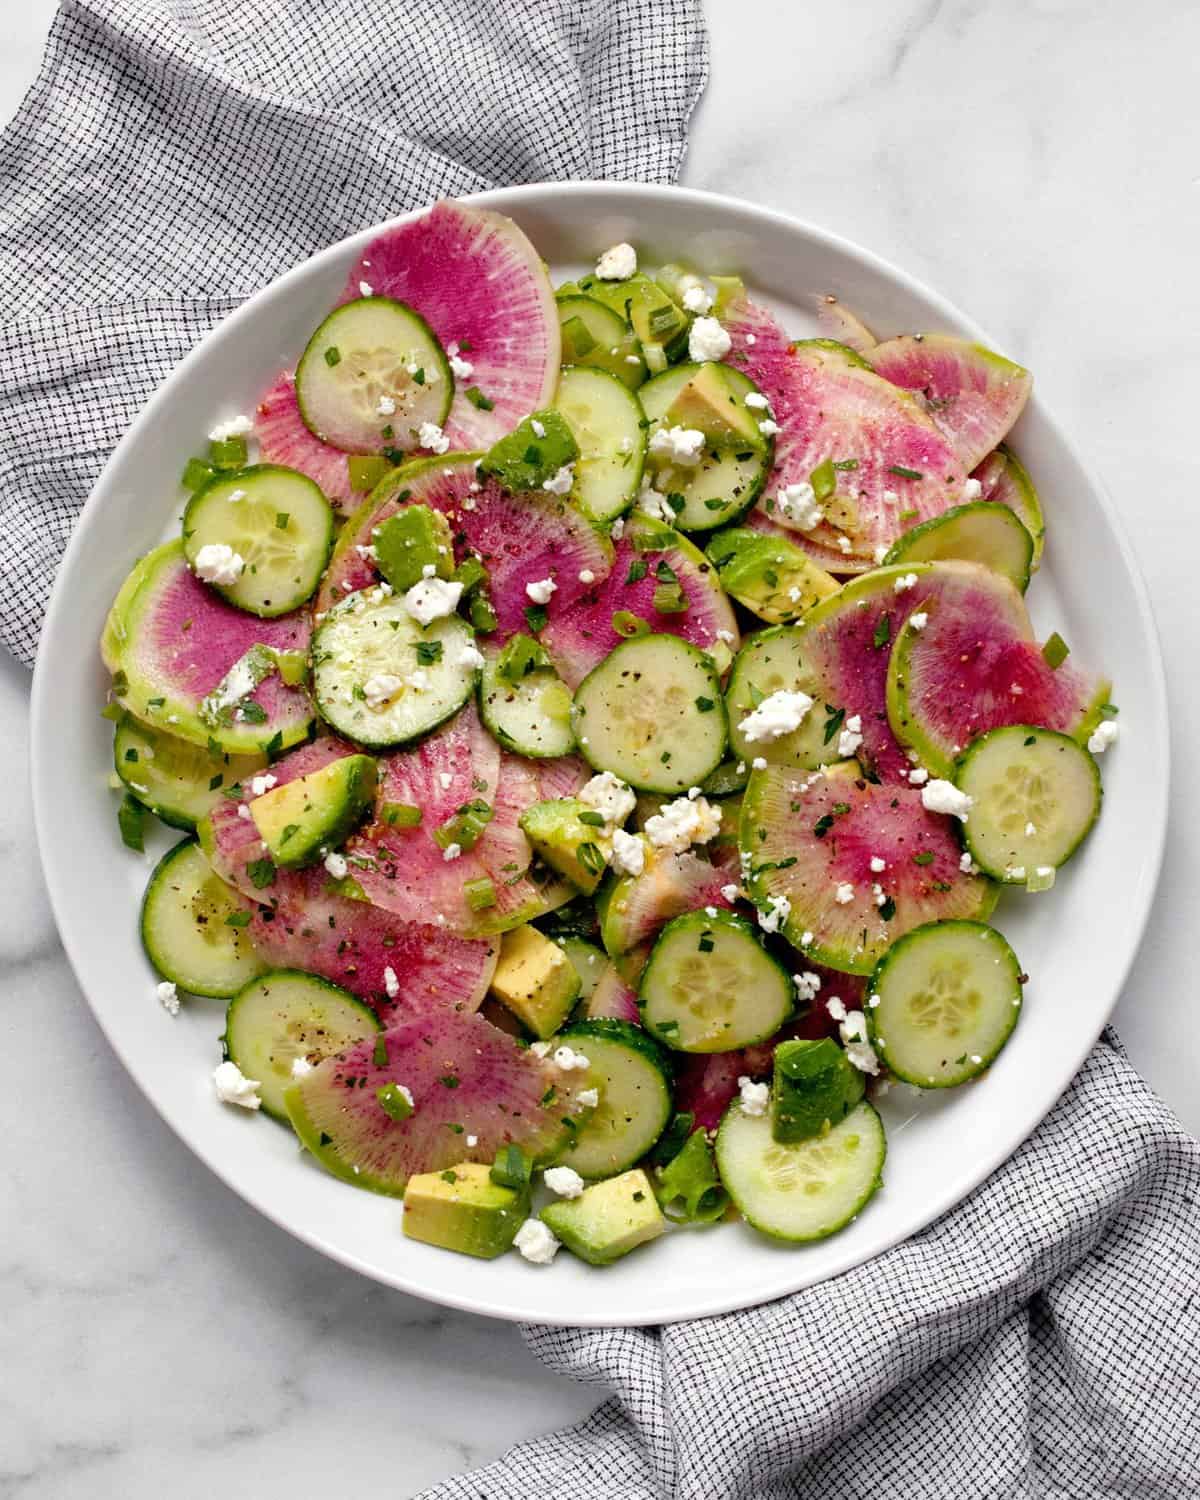 Radish salad with cucumbers and avocados on a plate.